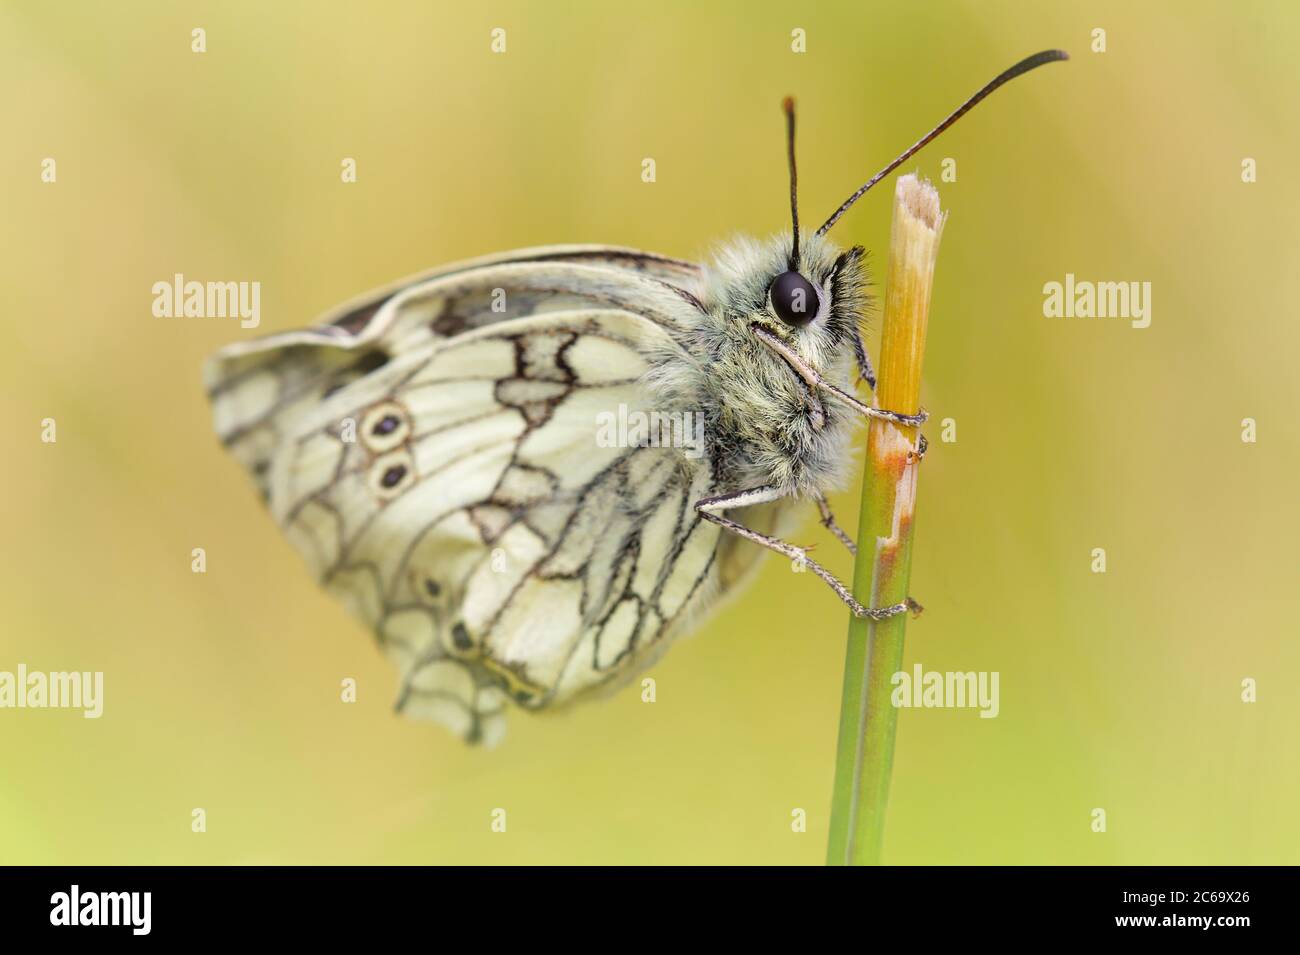 Recently Emerged Marbled White Butterfly, Melanargia Galathea, resting On A Grass Stem Pumping Up Its Wrinkled Wings Against A Diffuse Green Grass Bac Stock Photo